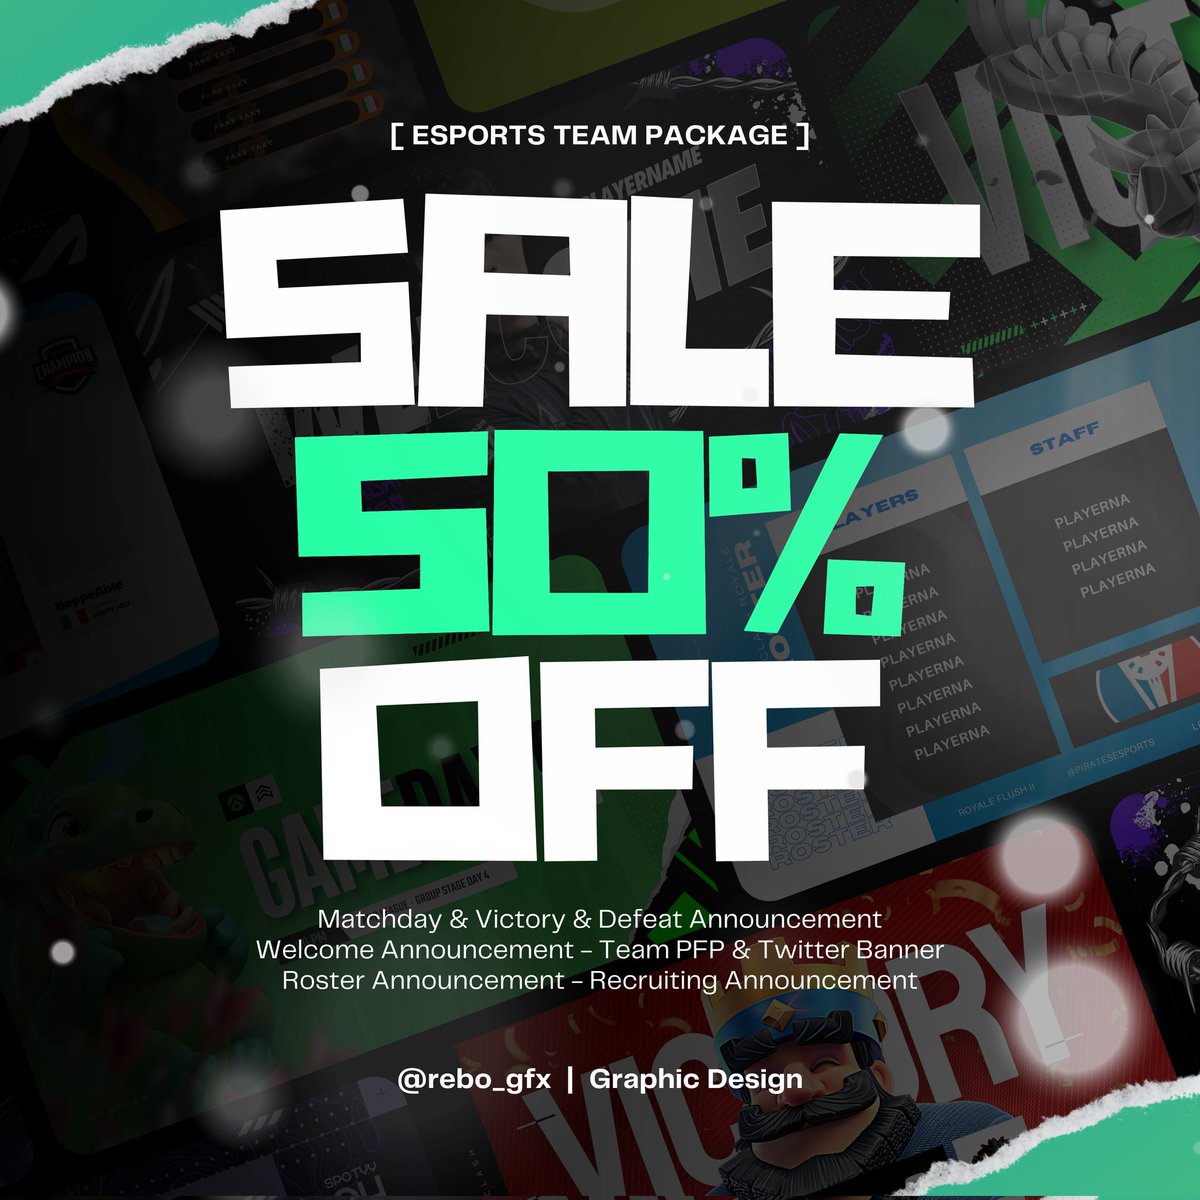 🎨 TEAM PACKAGE 50% SALE‼️

- Only untill 01.07 
- Everything for your Team
- High Quality 💯
- Package Accessible and editable from Mobile

DM 📩 for commission

#Design #ClashRoyale #Sale50